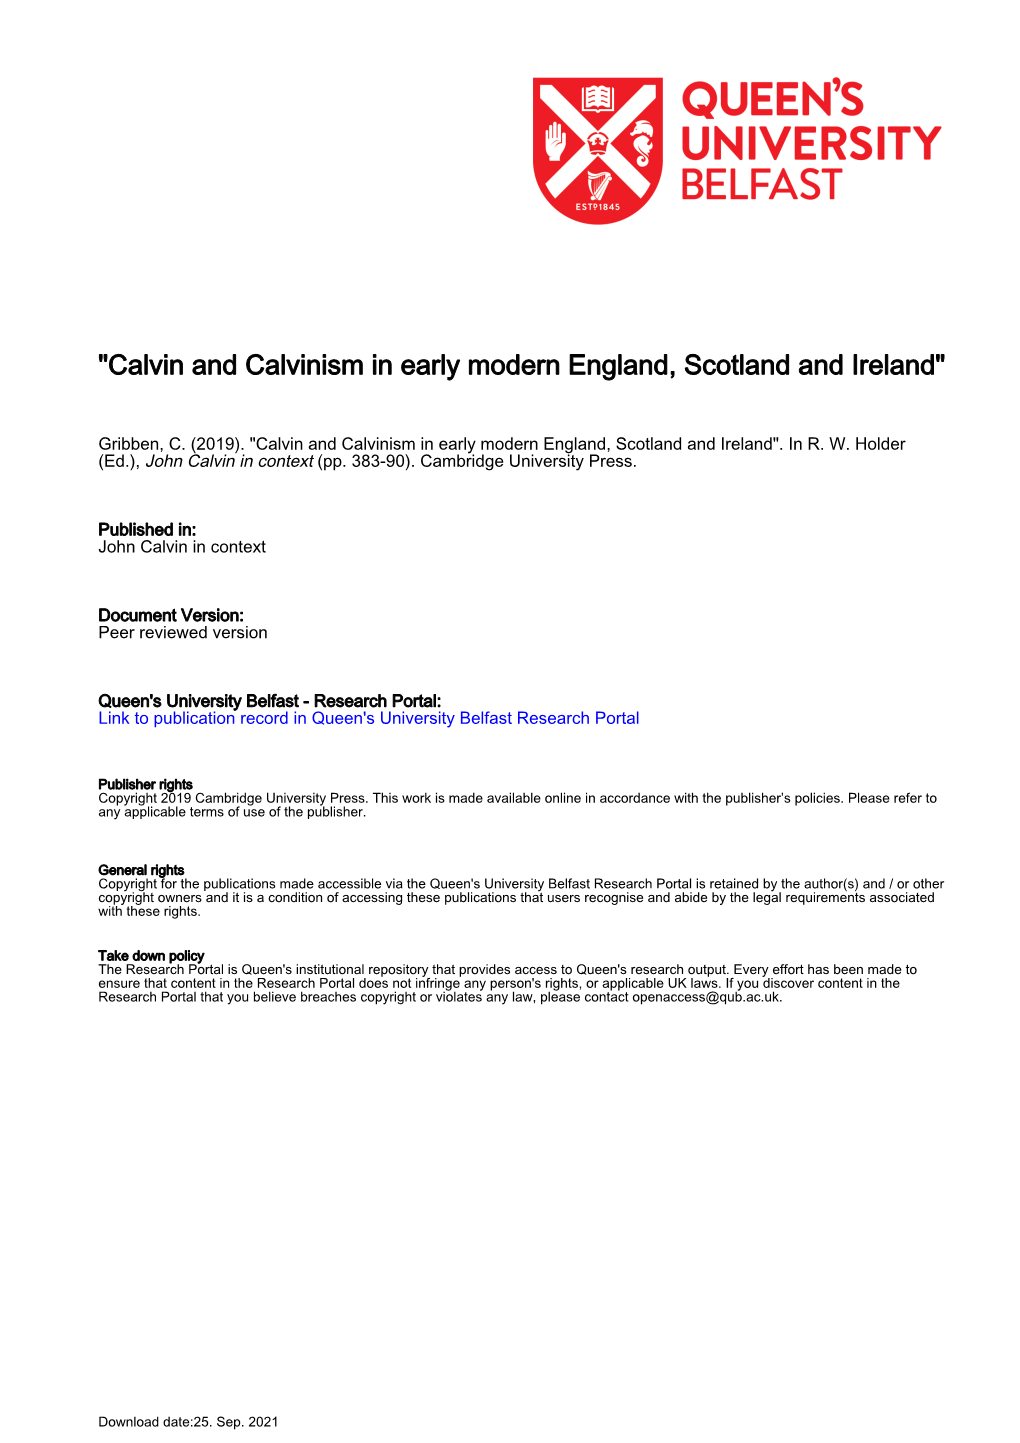 "Calvin and Calvinism in Early Modern England, Scotland and Ireland"